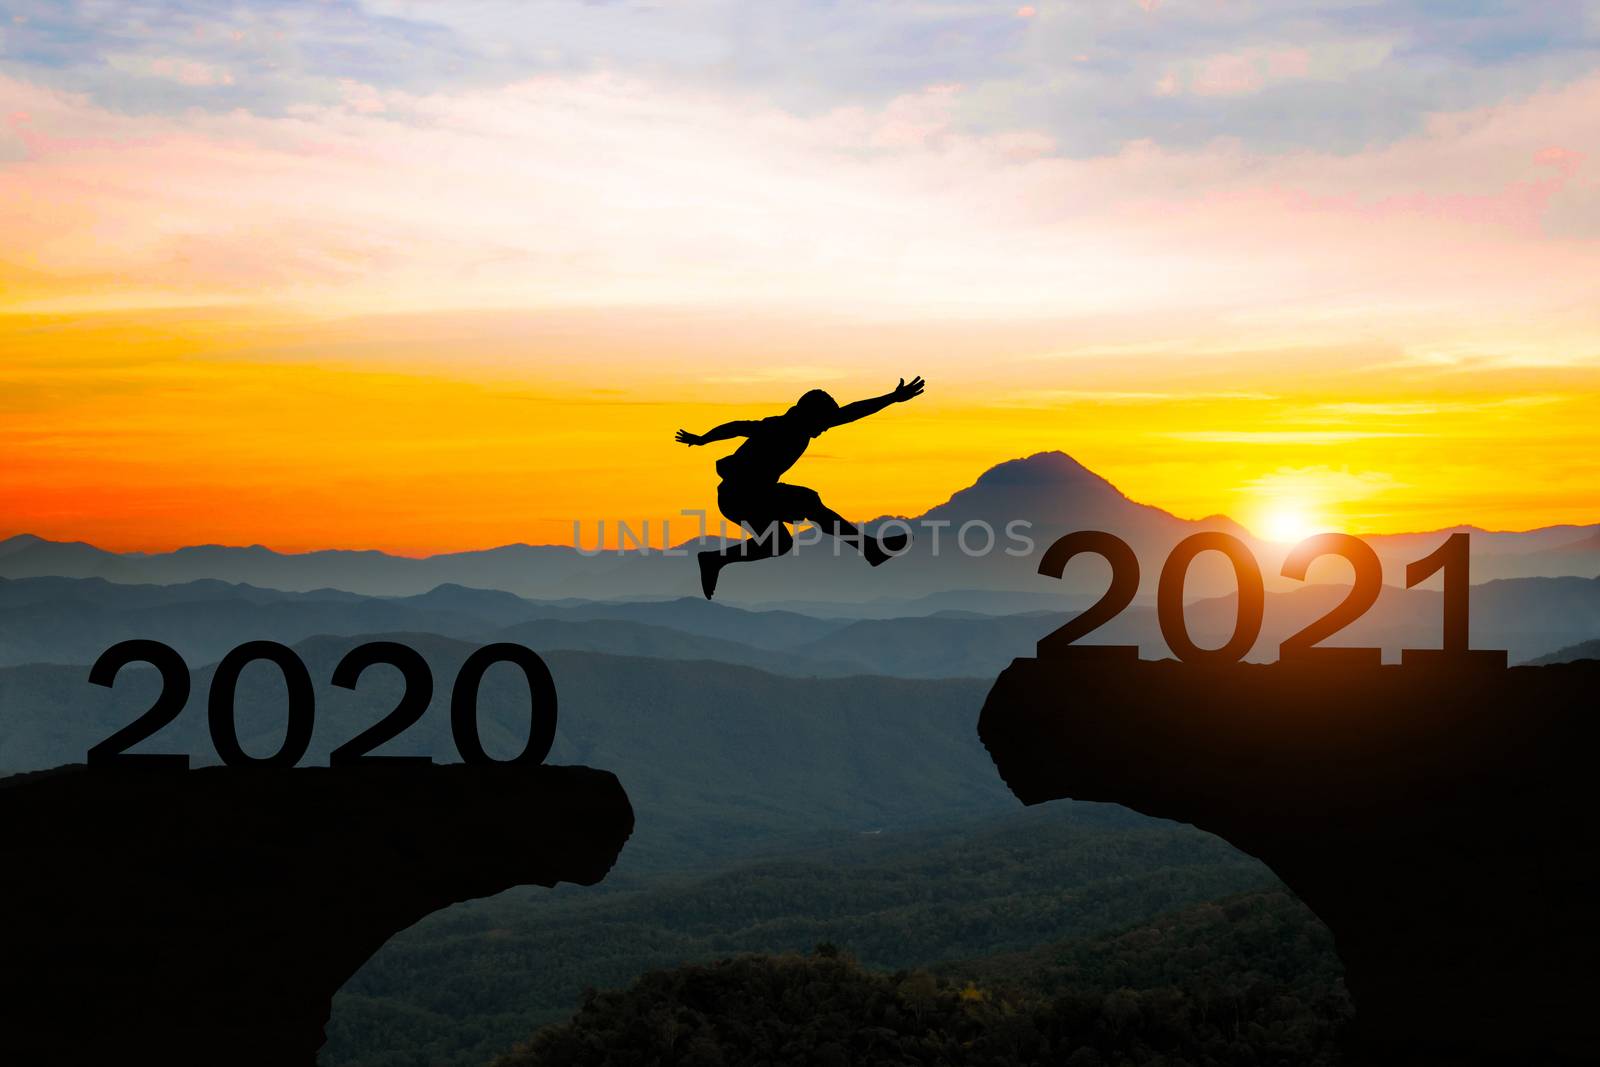 Man jump silhouette between year 2020 and 2021 new year concept.
